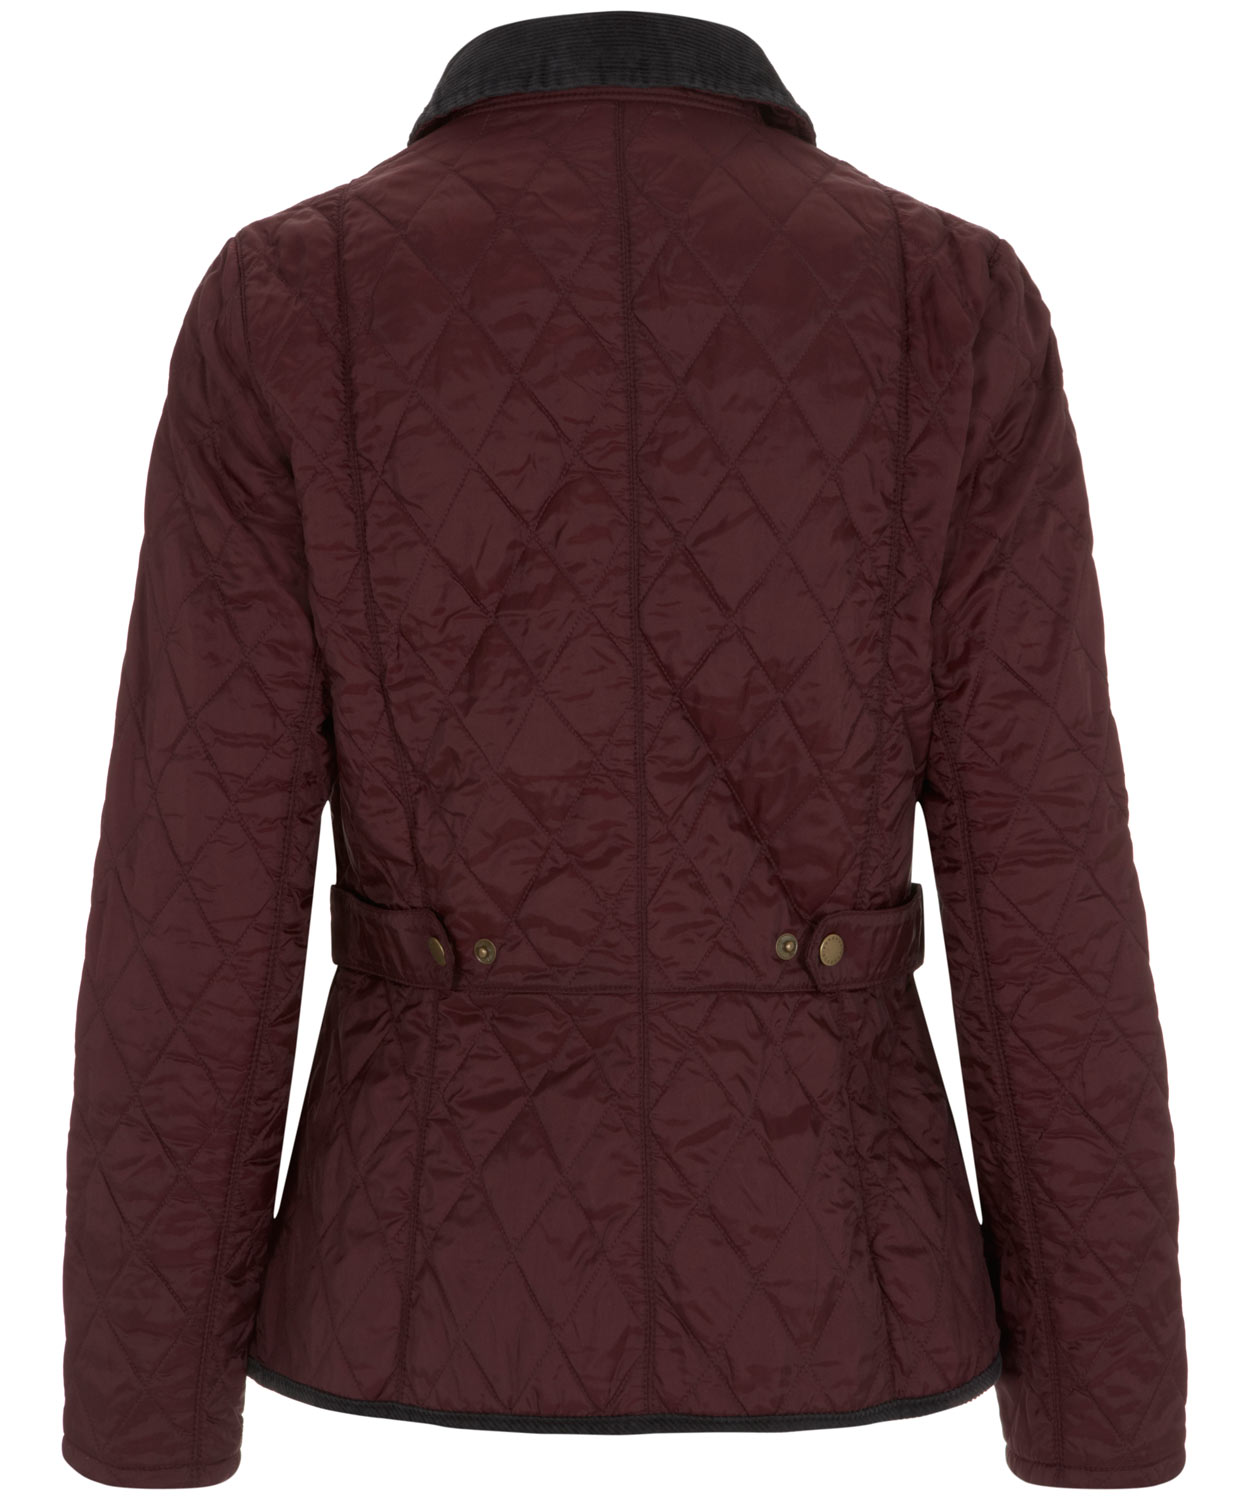 Barbour Vintage Cord Collar Quilted Jacket in Burgundy (Red) - Lyst